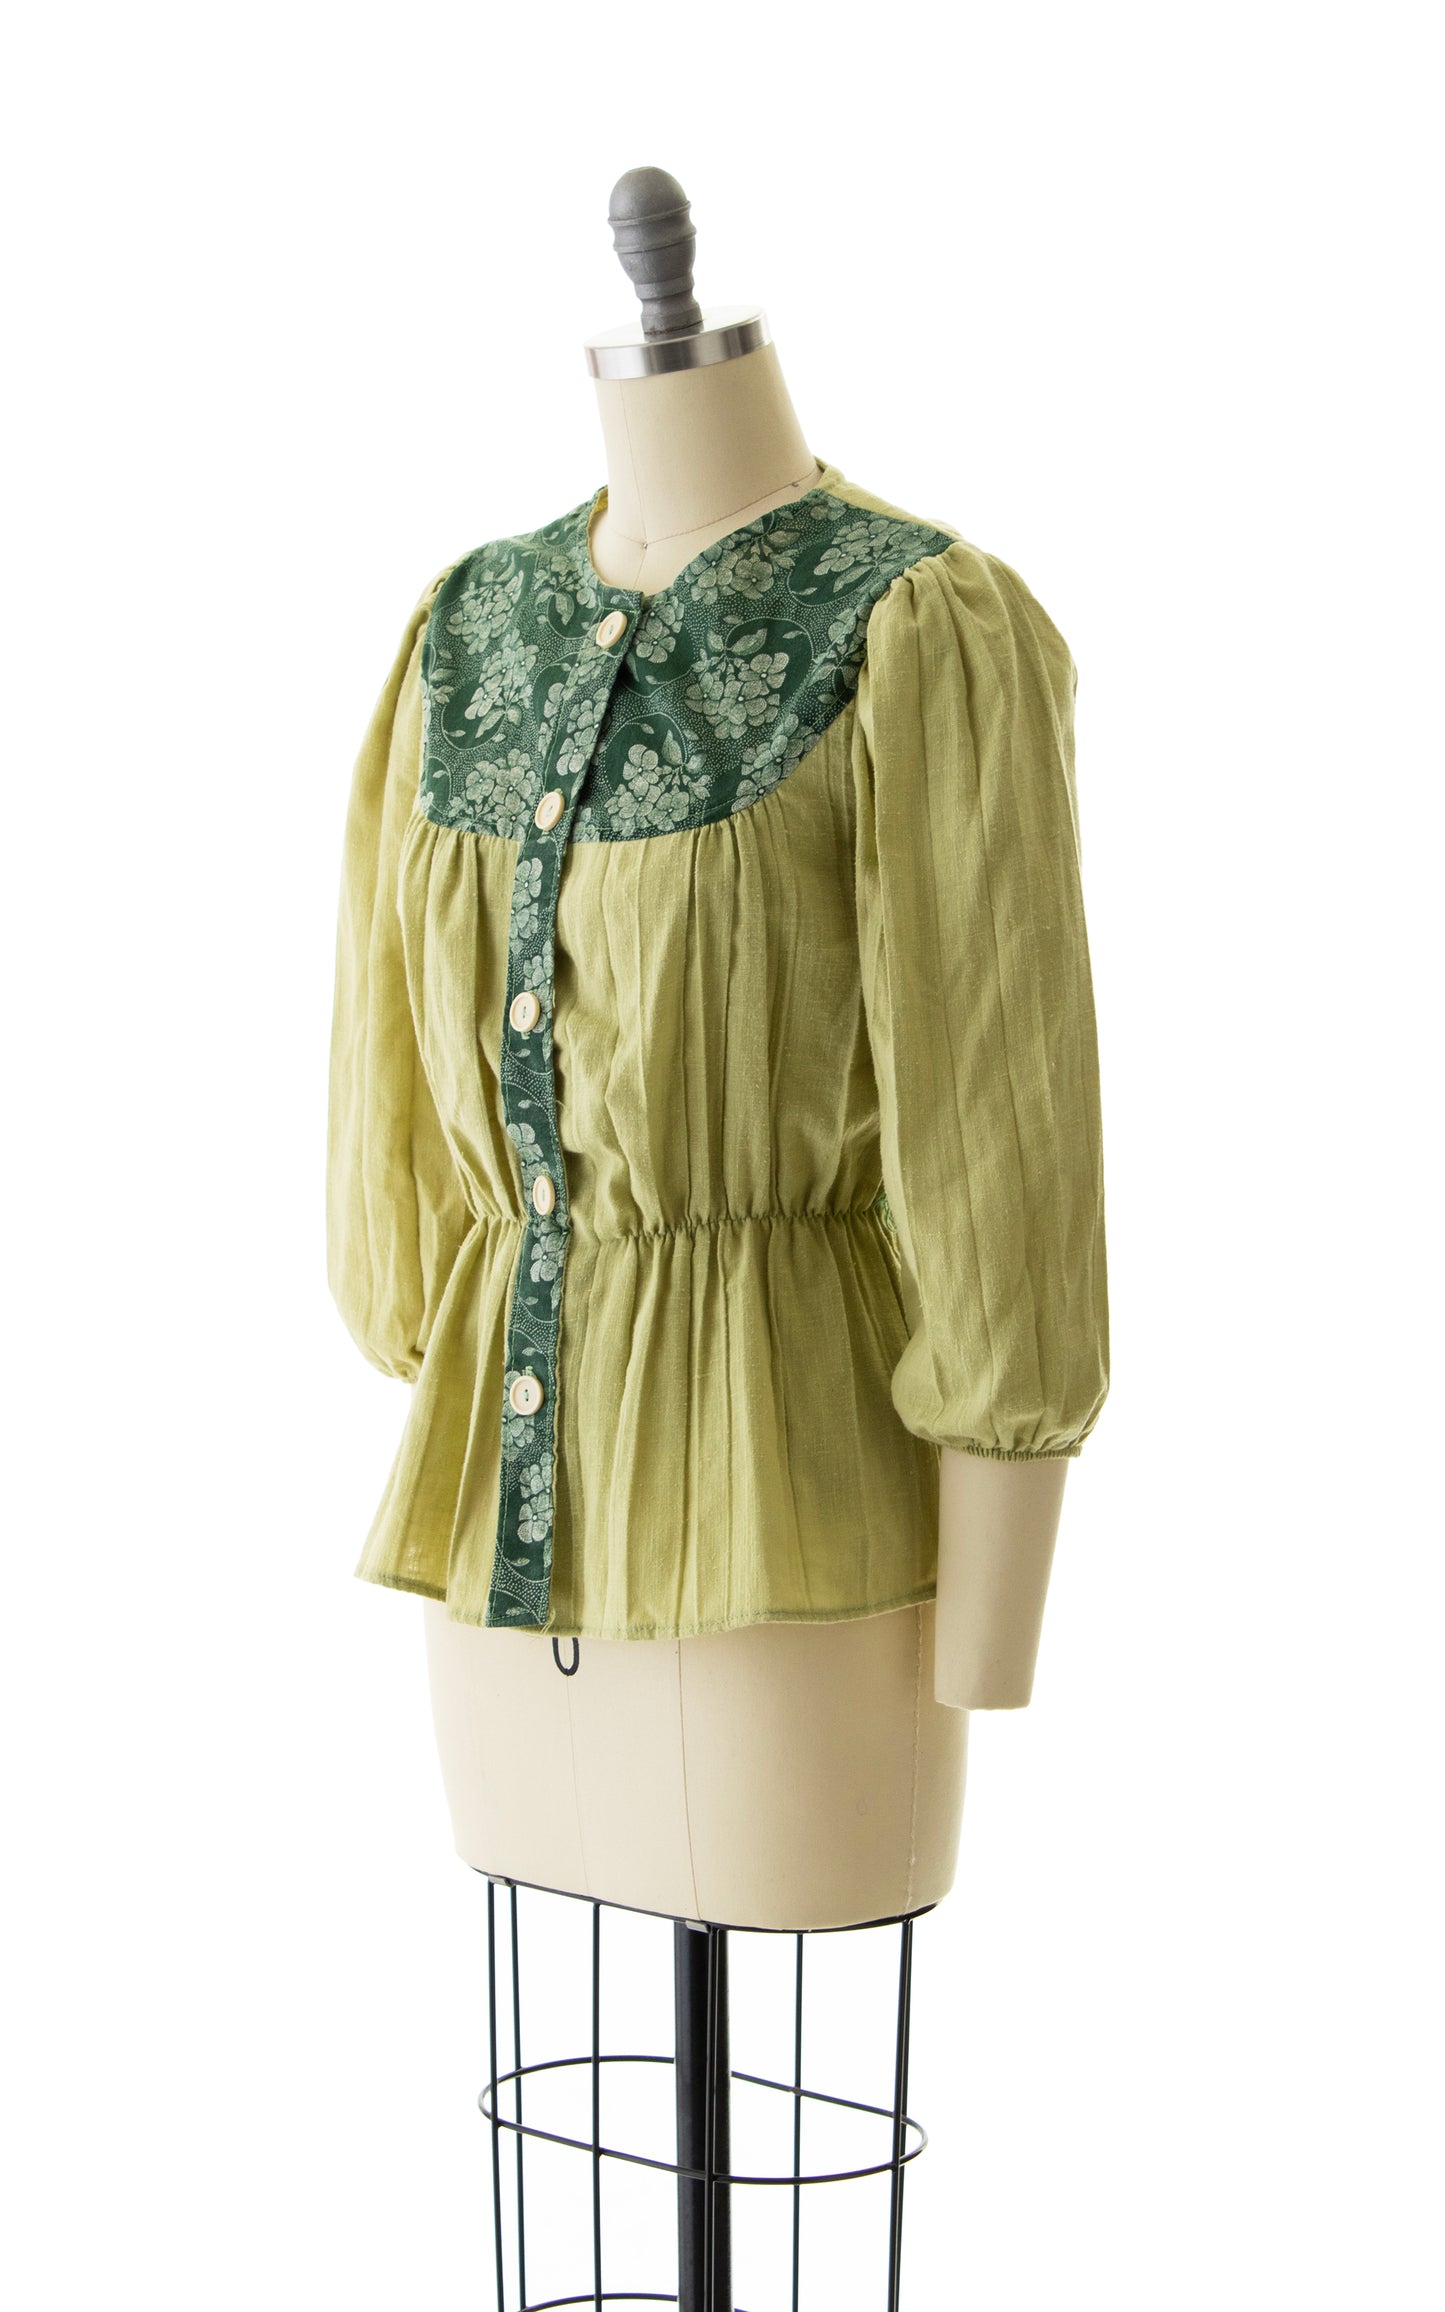 1970s Floral Gauze Blouse | x-small/small